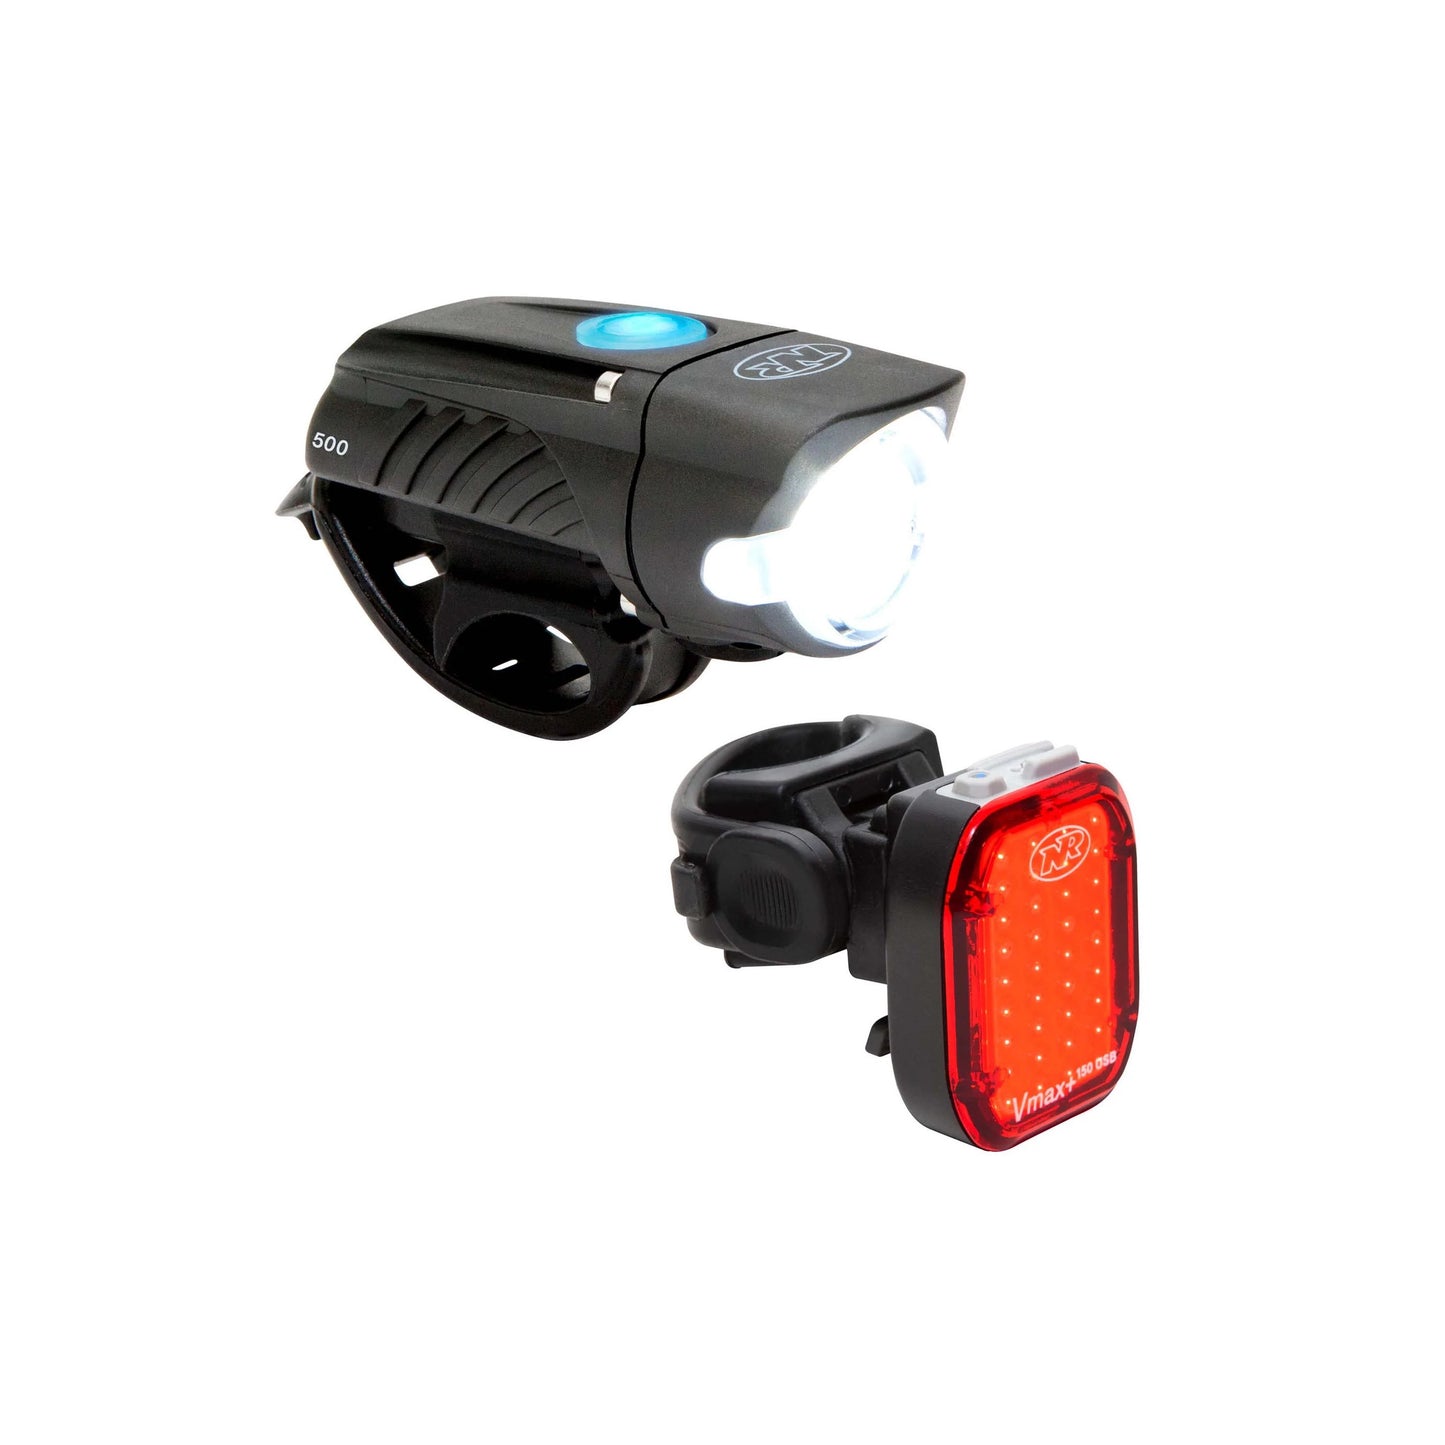 Swift™ 300 and Vmax+™ 150 Combo Front and Rear Light Set - Lenny's Bike Shop